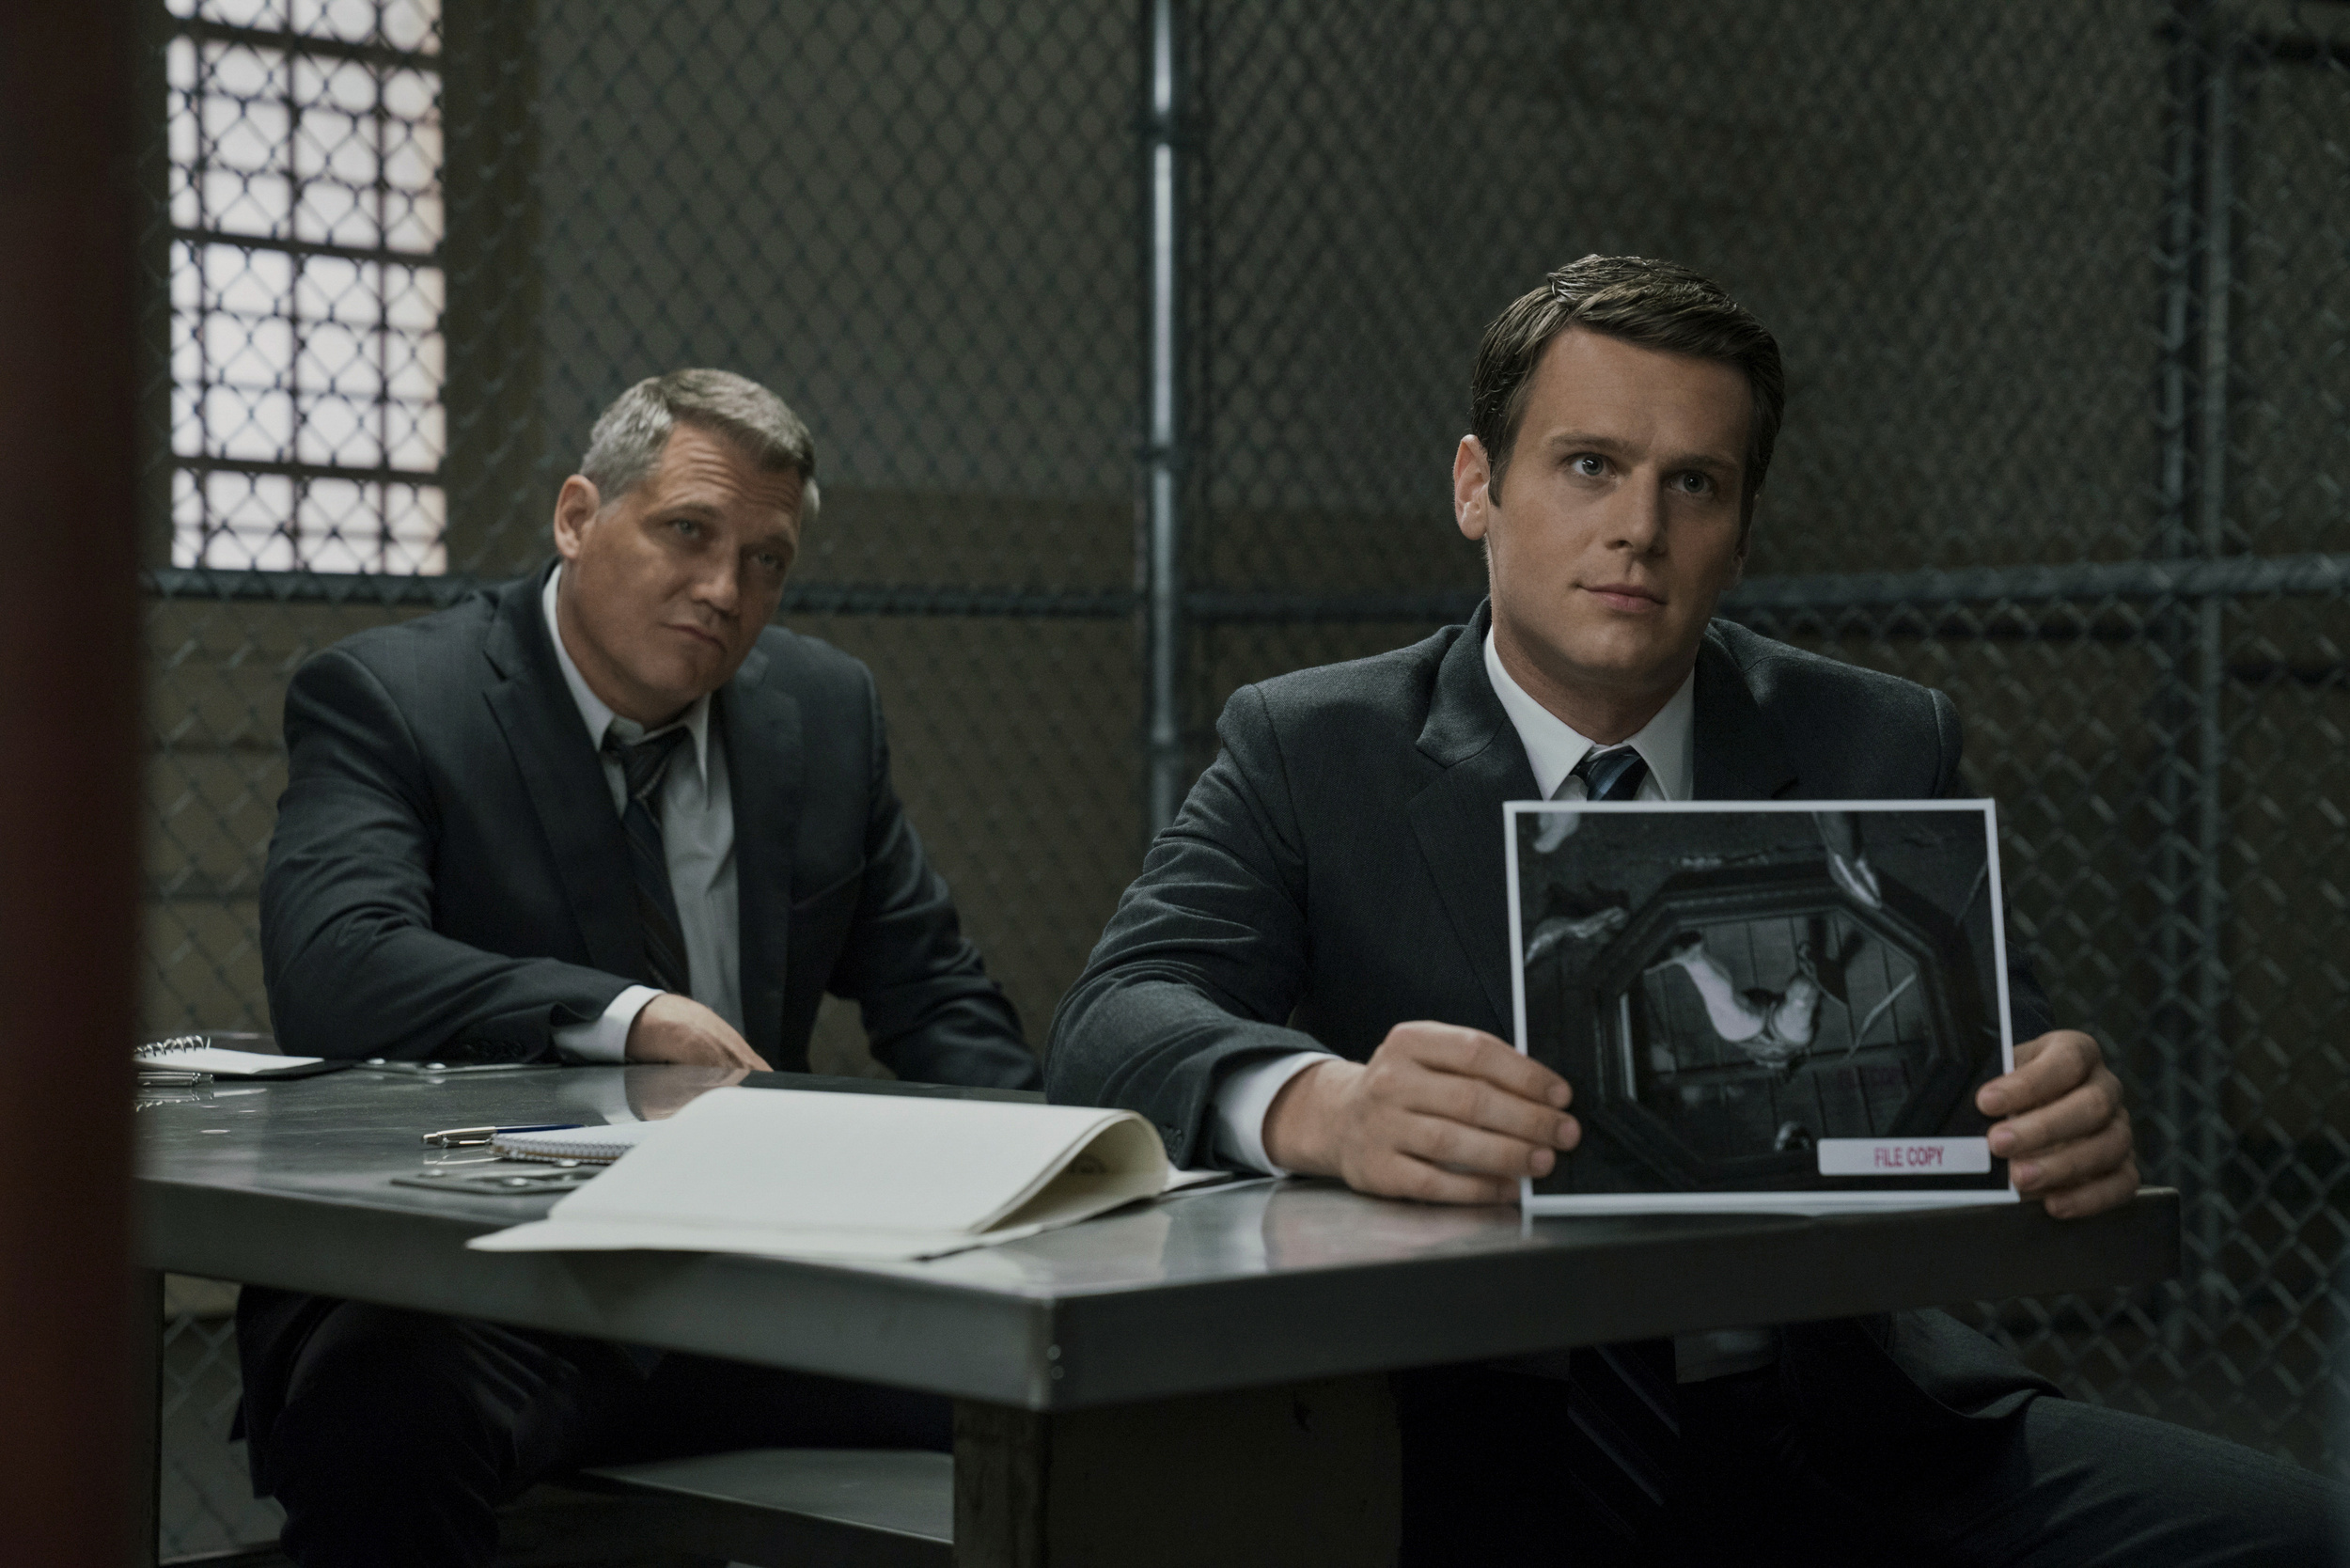 <p>This Netflix series, based on the 1995 book "Mindhunter: Inside the FBI's Elite Serial Crime Unit," is a must for anyone who appreciates the science — and art — of criminal profiling. </p><p><a href='https://www.msn.com/en-us/community/channel/vid-cj9pqbr0vn9in2b6ddcd8sfgpfq6x6utp44fssrv6mc2gtybw0us'>Follow us on MSN to see more of our exclusive entertainment content.</a></p>